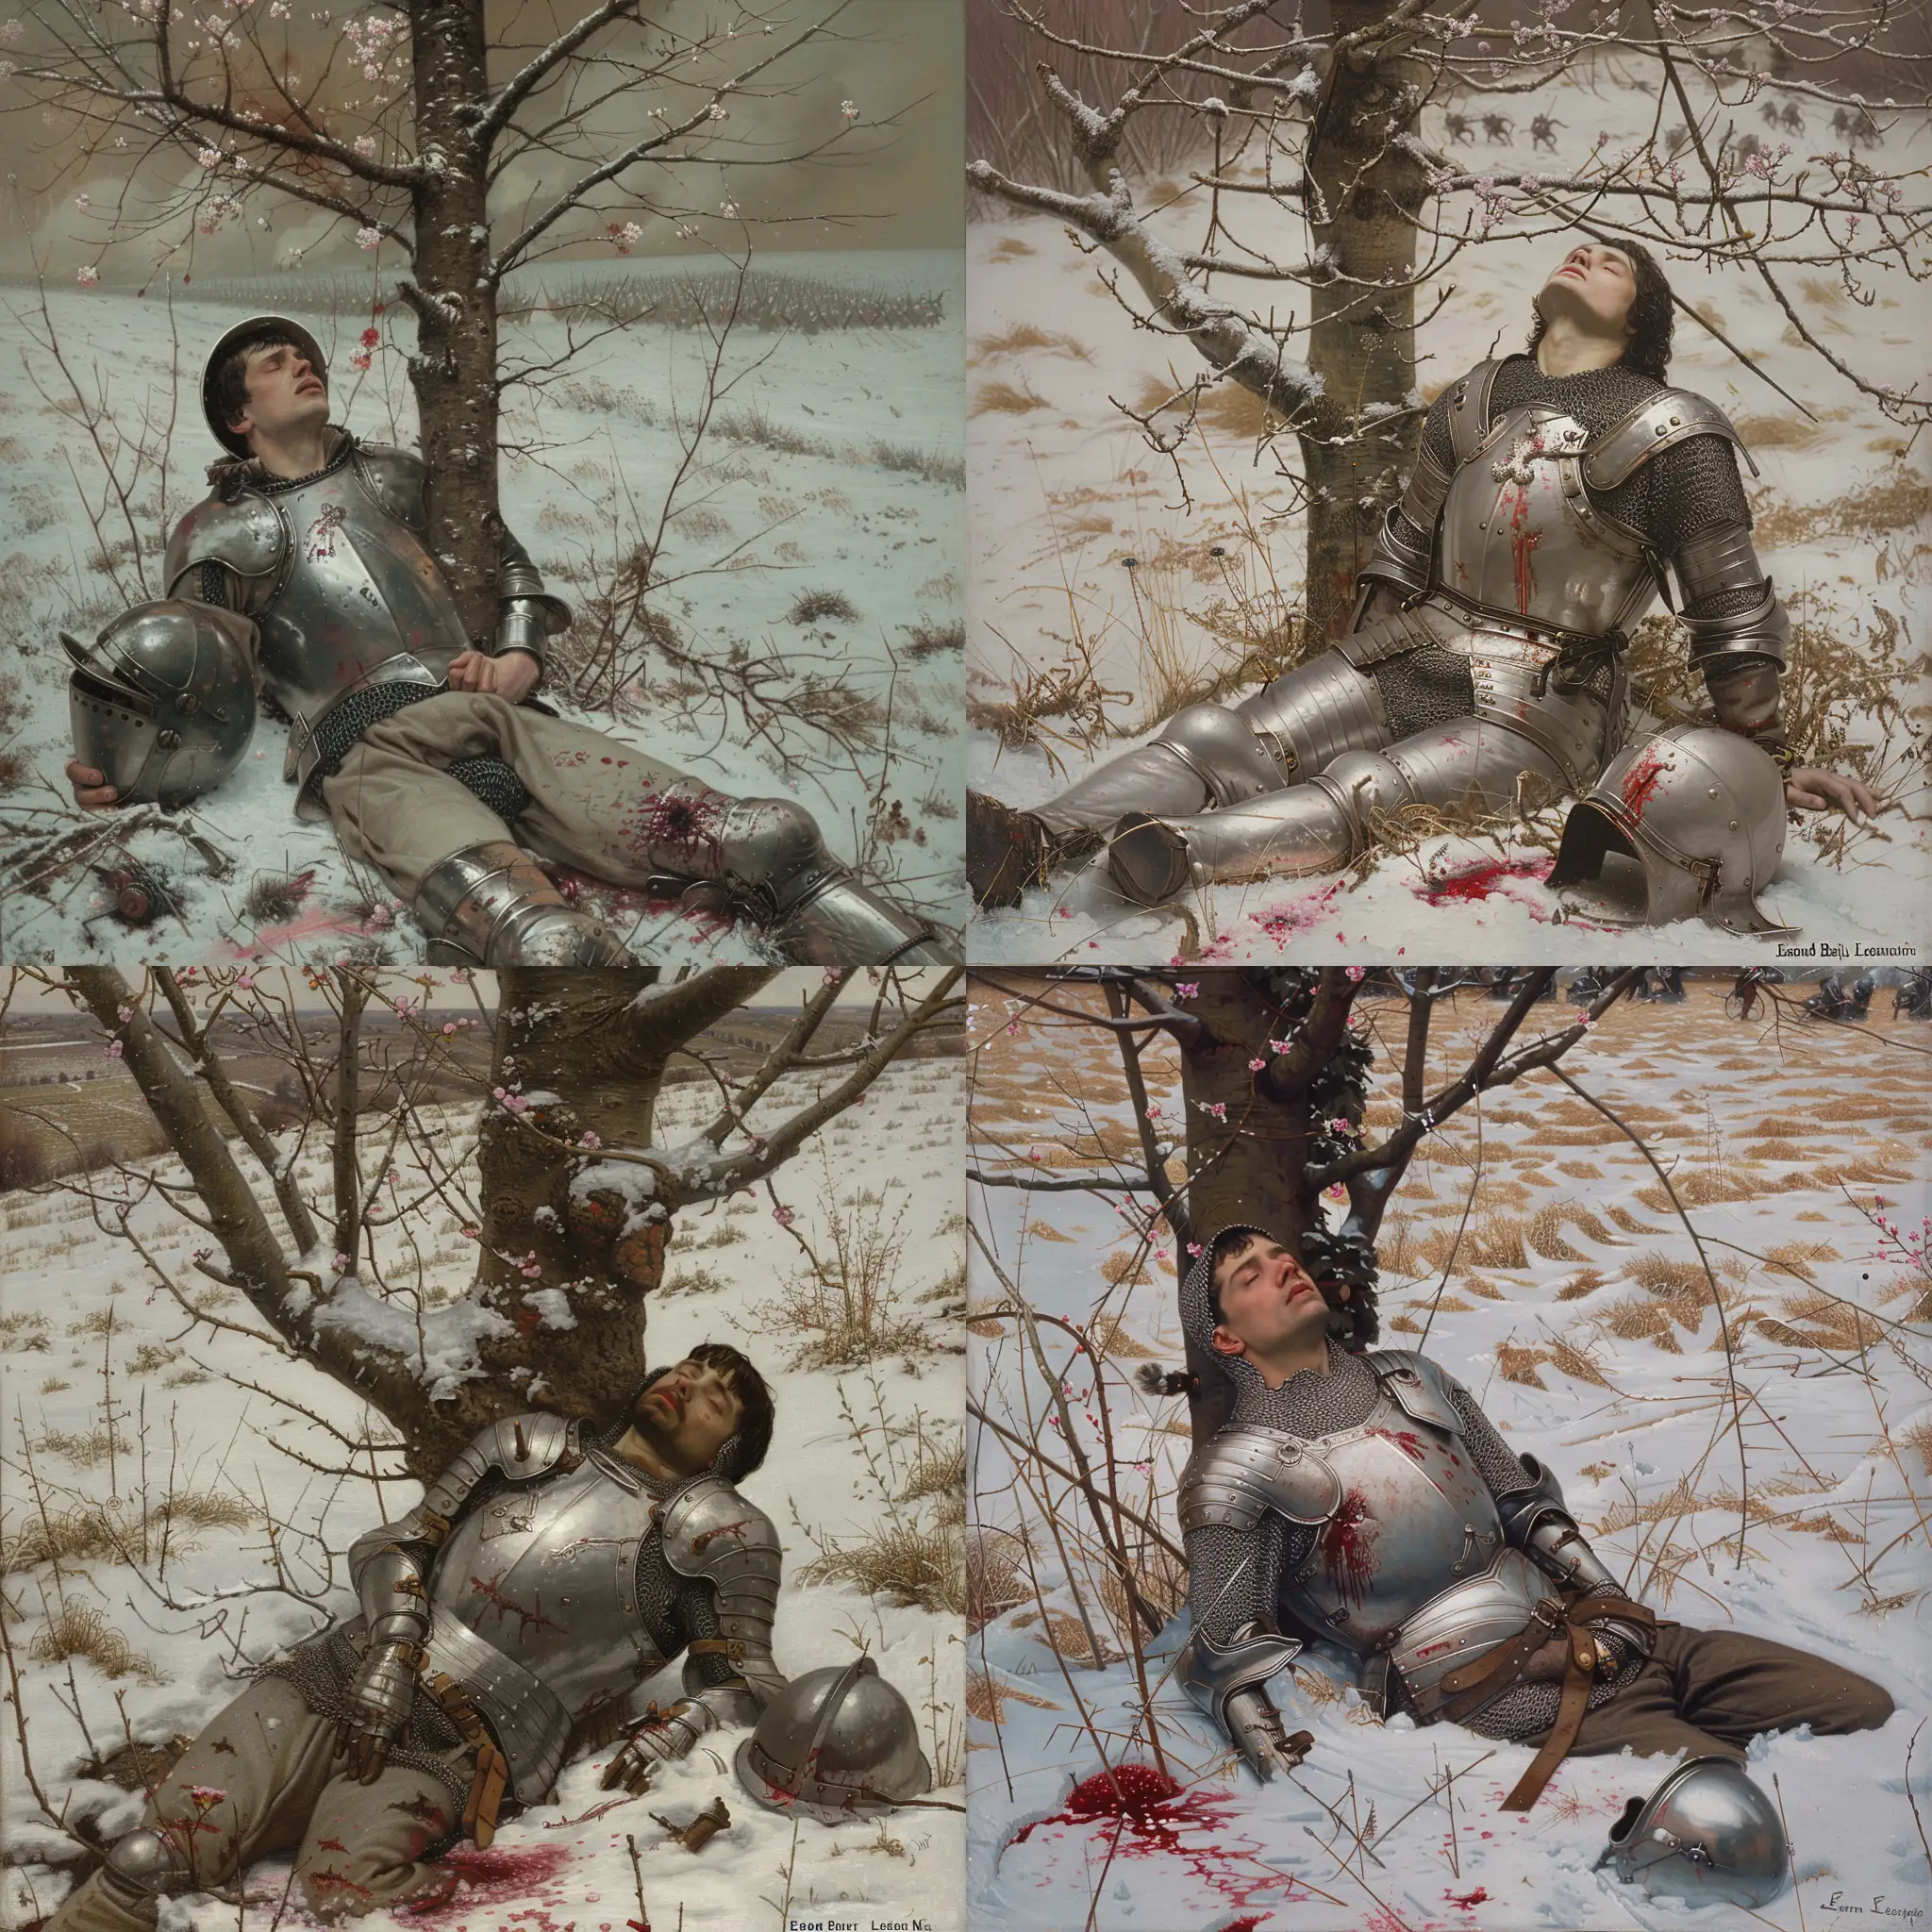 Medieval-Soldier-Dying-in-Snowy-Battlefield-with-Blossoming-Tree